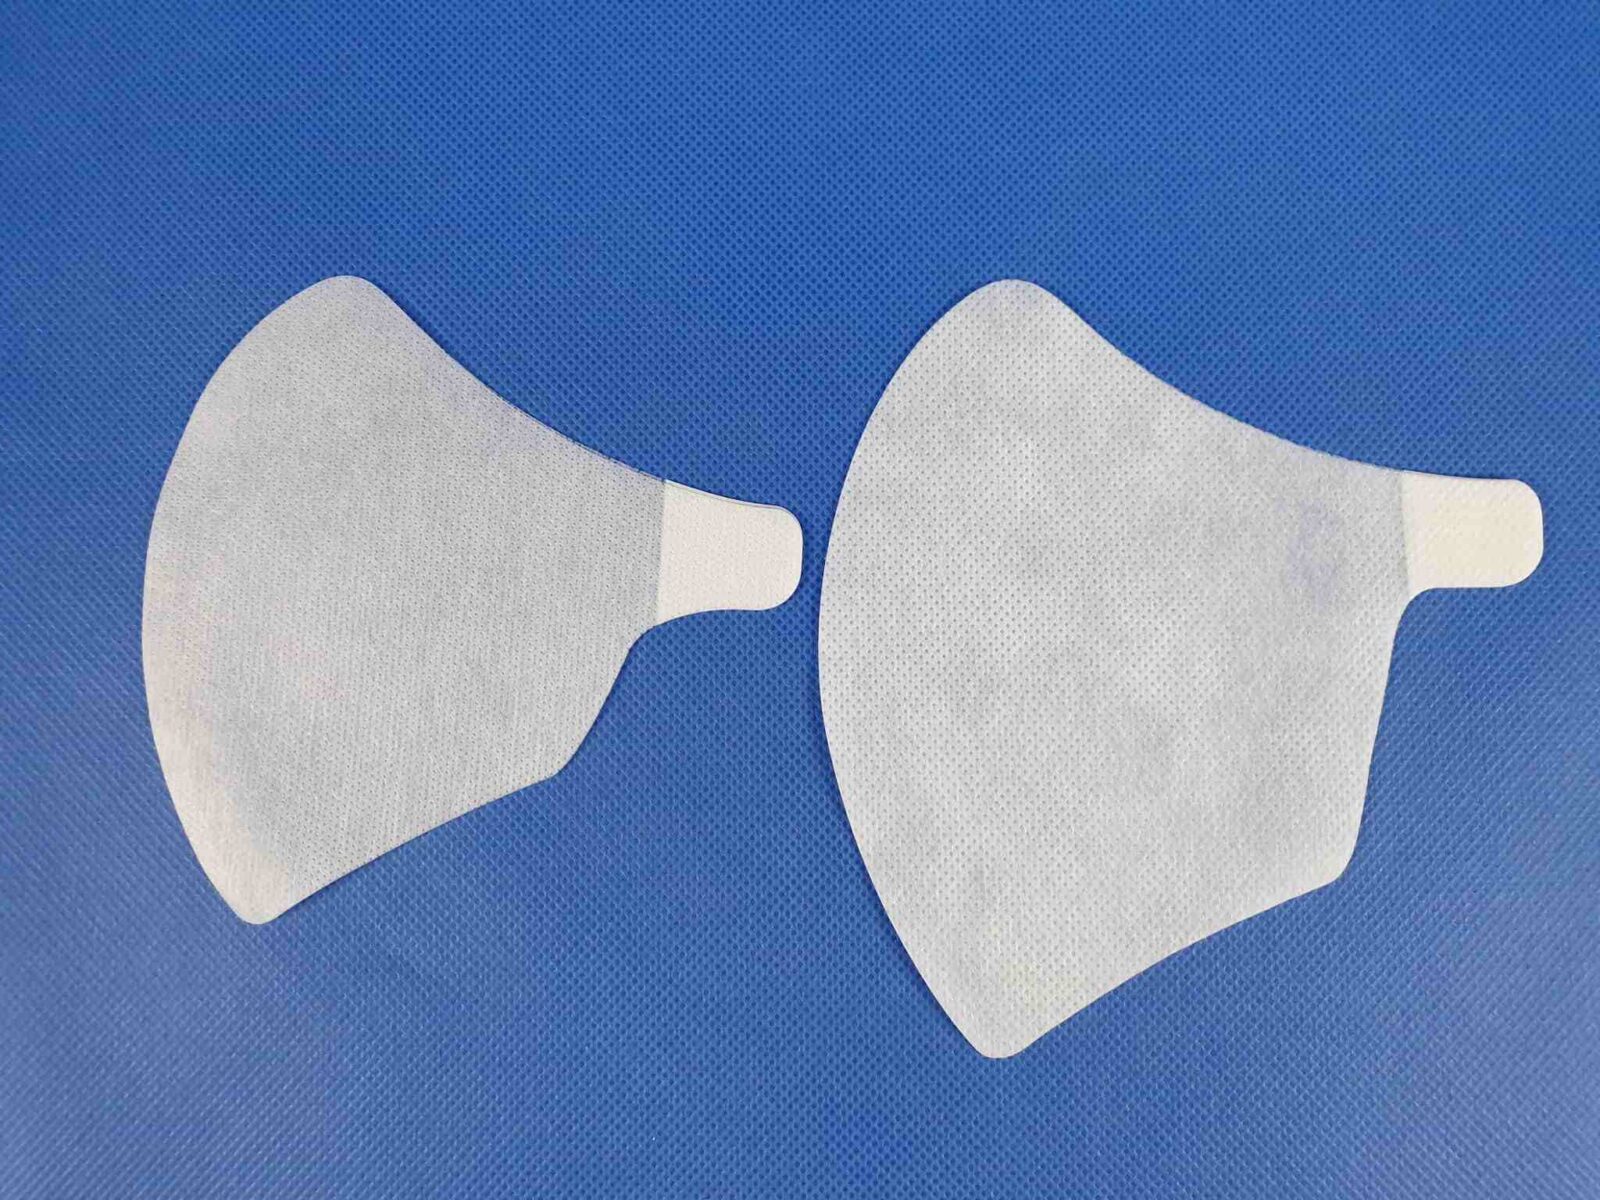 Etisoft disposable masks - how to introduce a new product to the market?